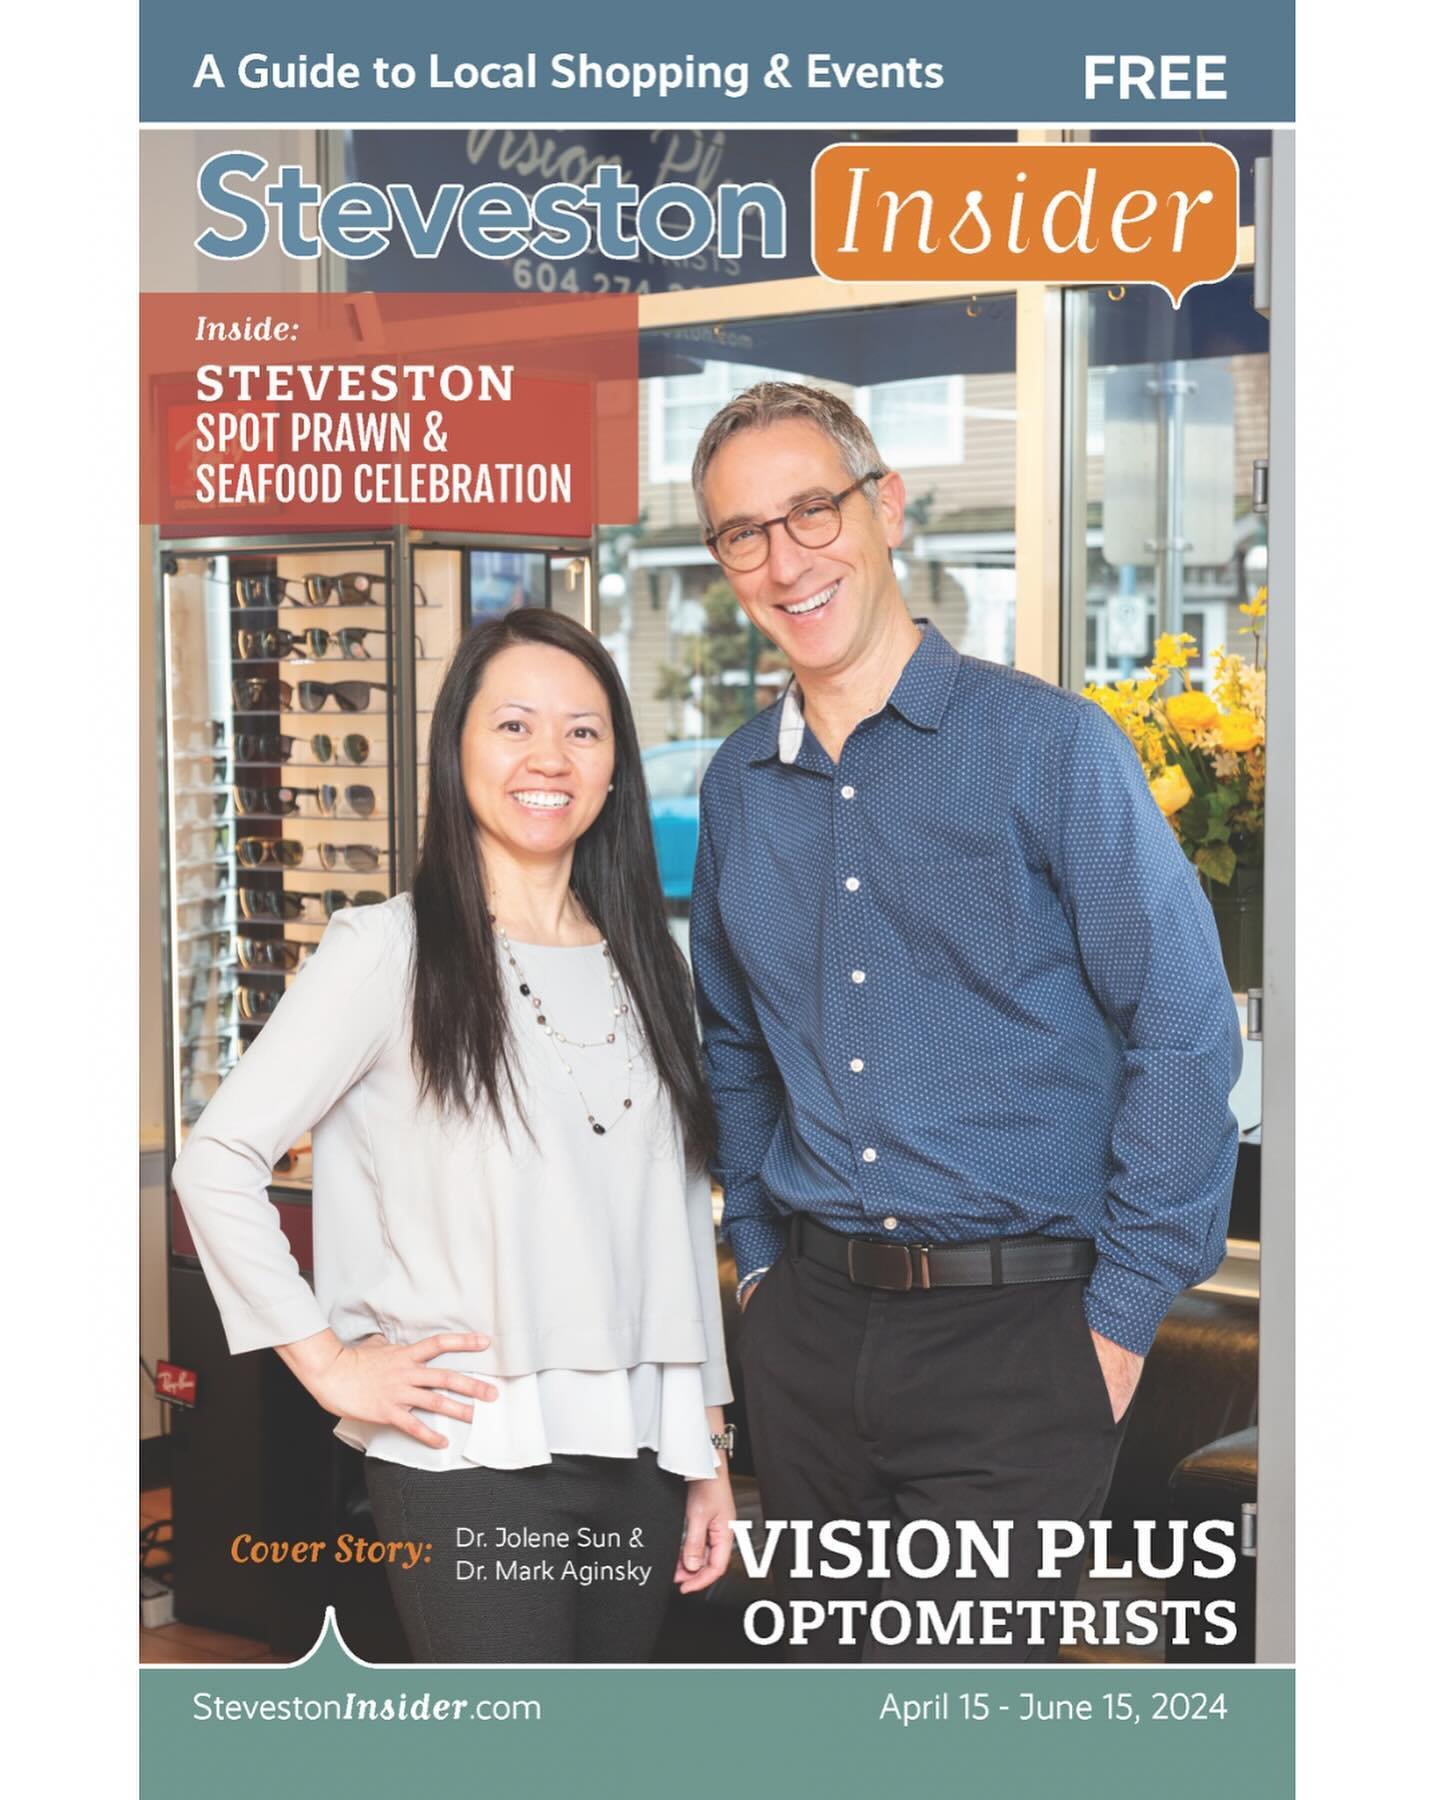 Vision Plus Optometrists is now the Cover Story in Steveston Insider from April 15 - June 15 🎉🎉🎉 Grab yourself a copy at local businesses in Steveston!

#stevestoninsider #eyecare #optometry #contactlenses #vision #eyehealth #eyeexam #health #opto